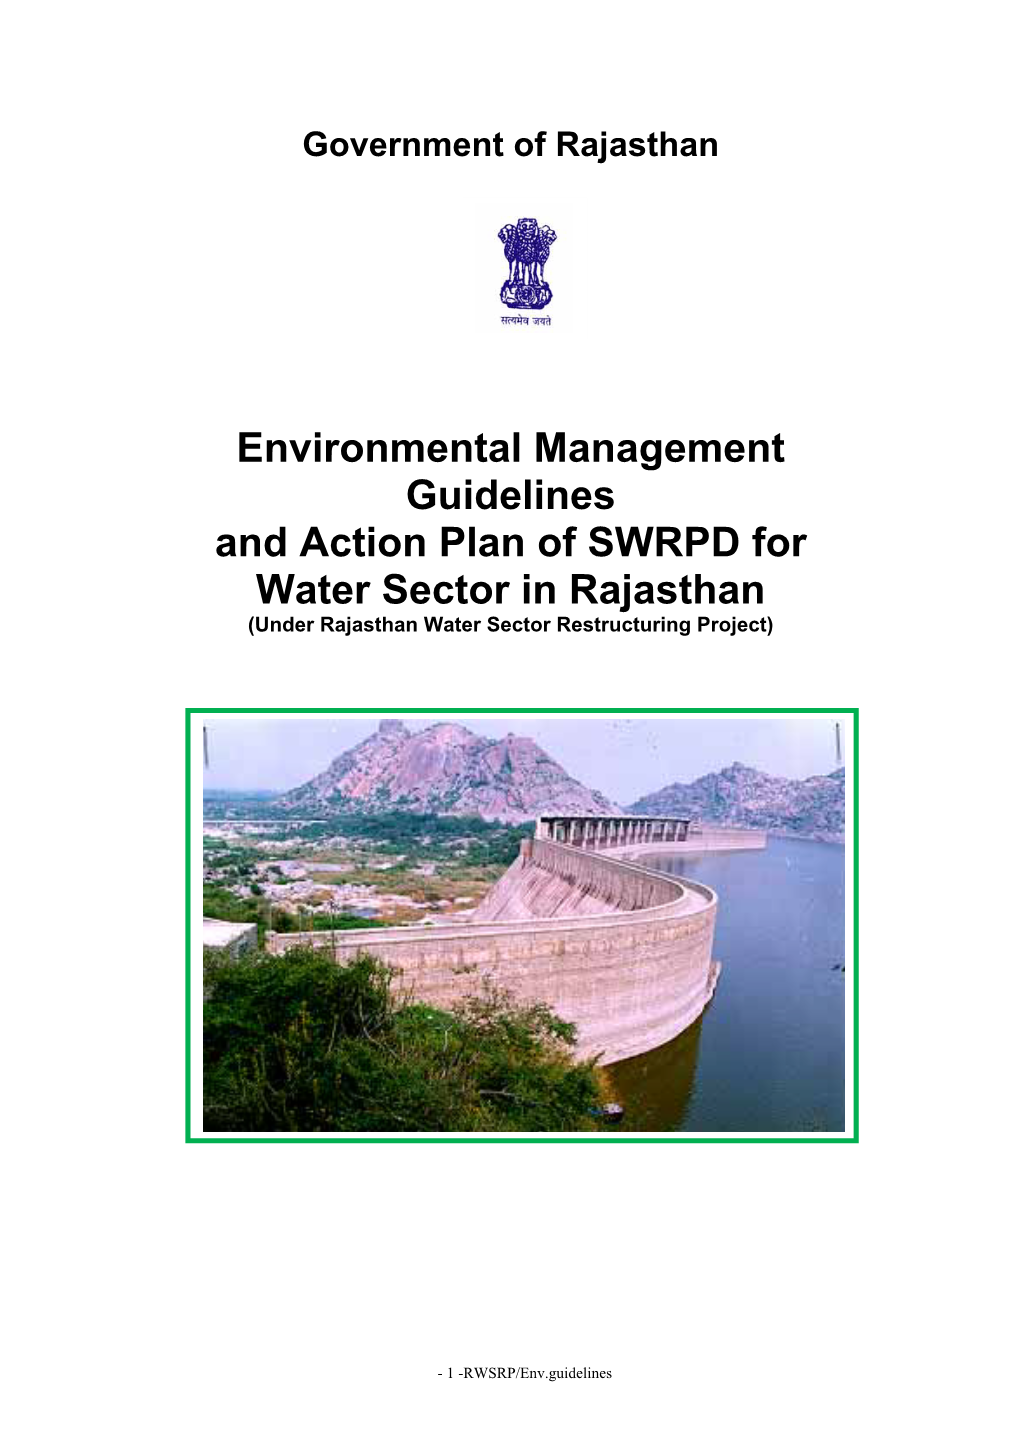 Environmental Management Guidelines and Action Plan of SWRPD for Water Sector in Rajasthan (Under Rajasthan Water Sector Restructuring Project)